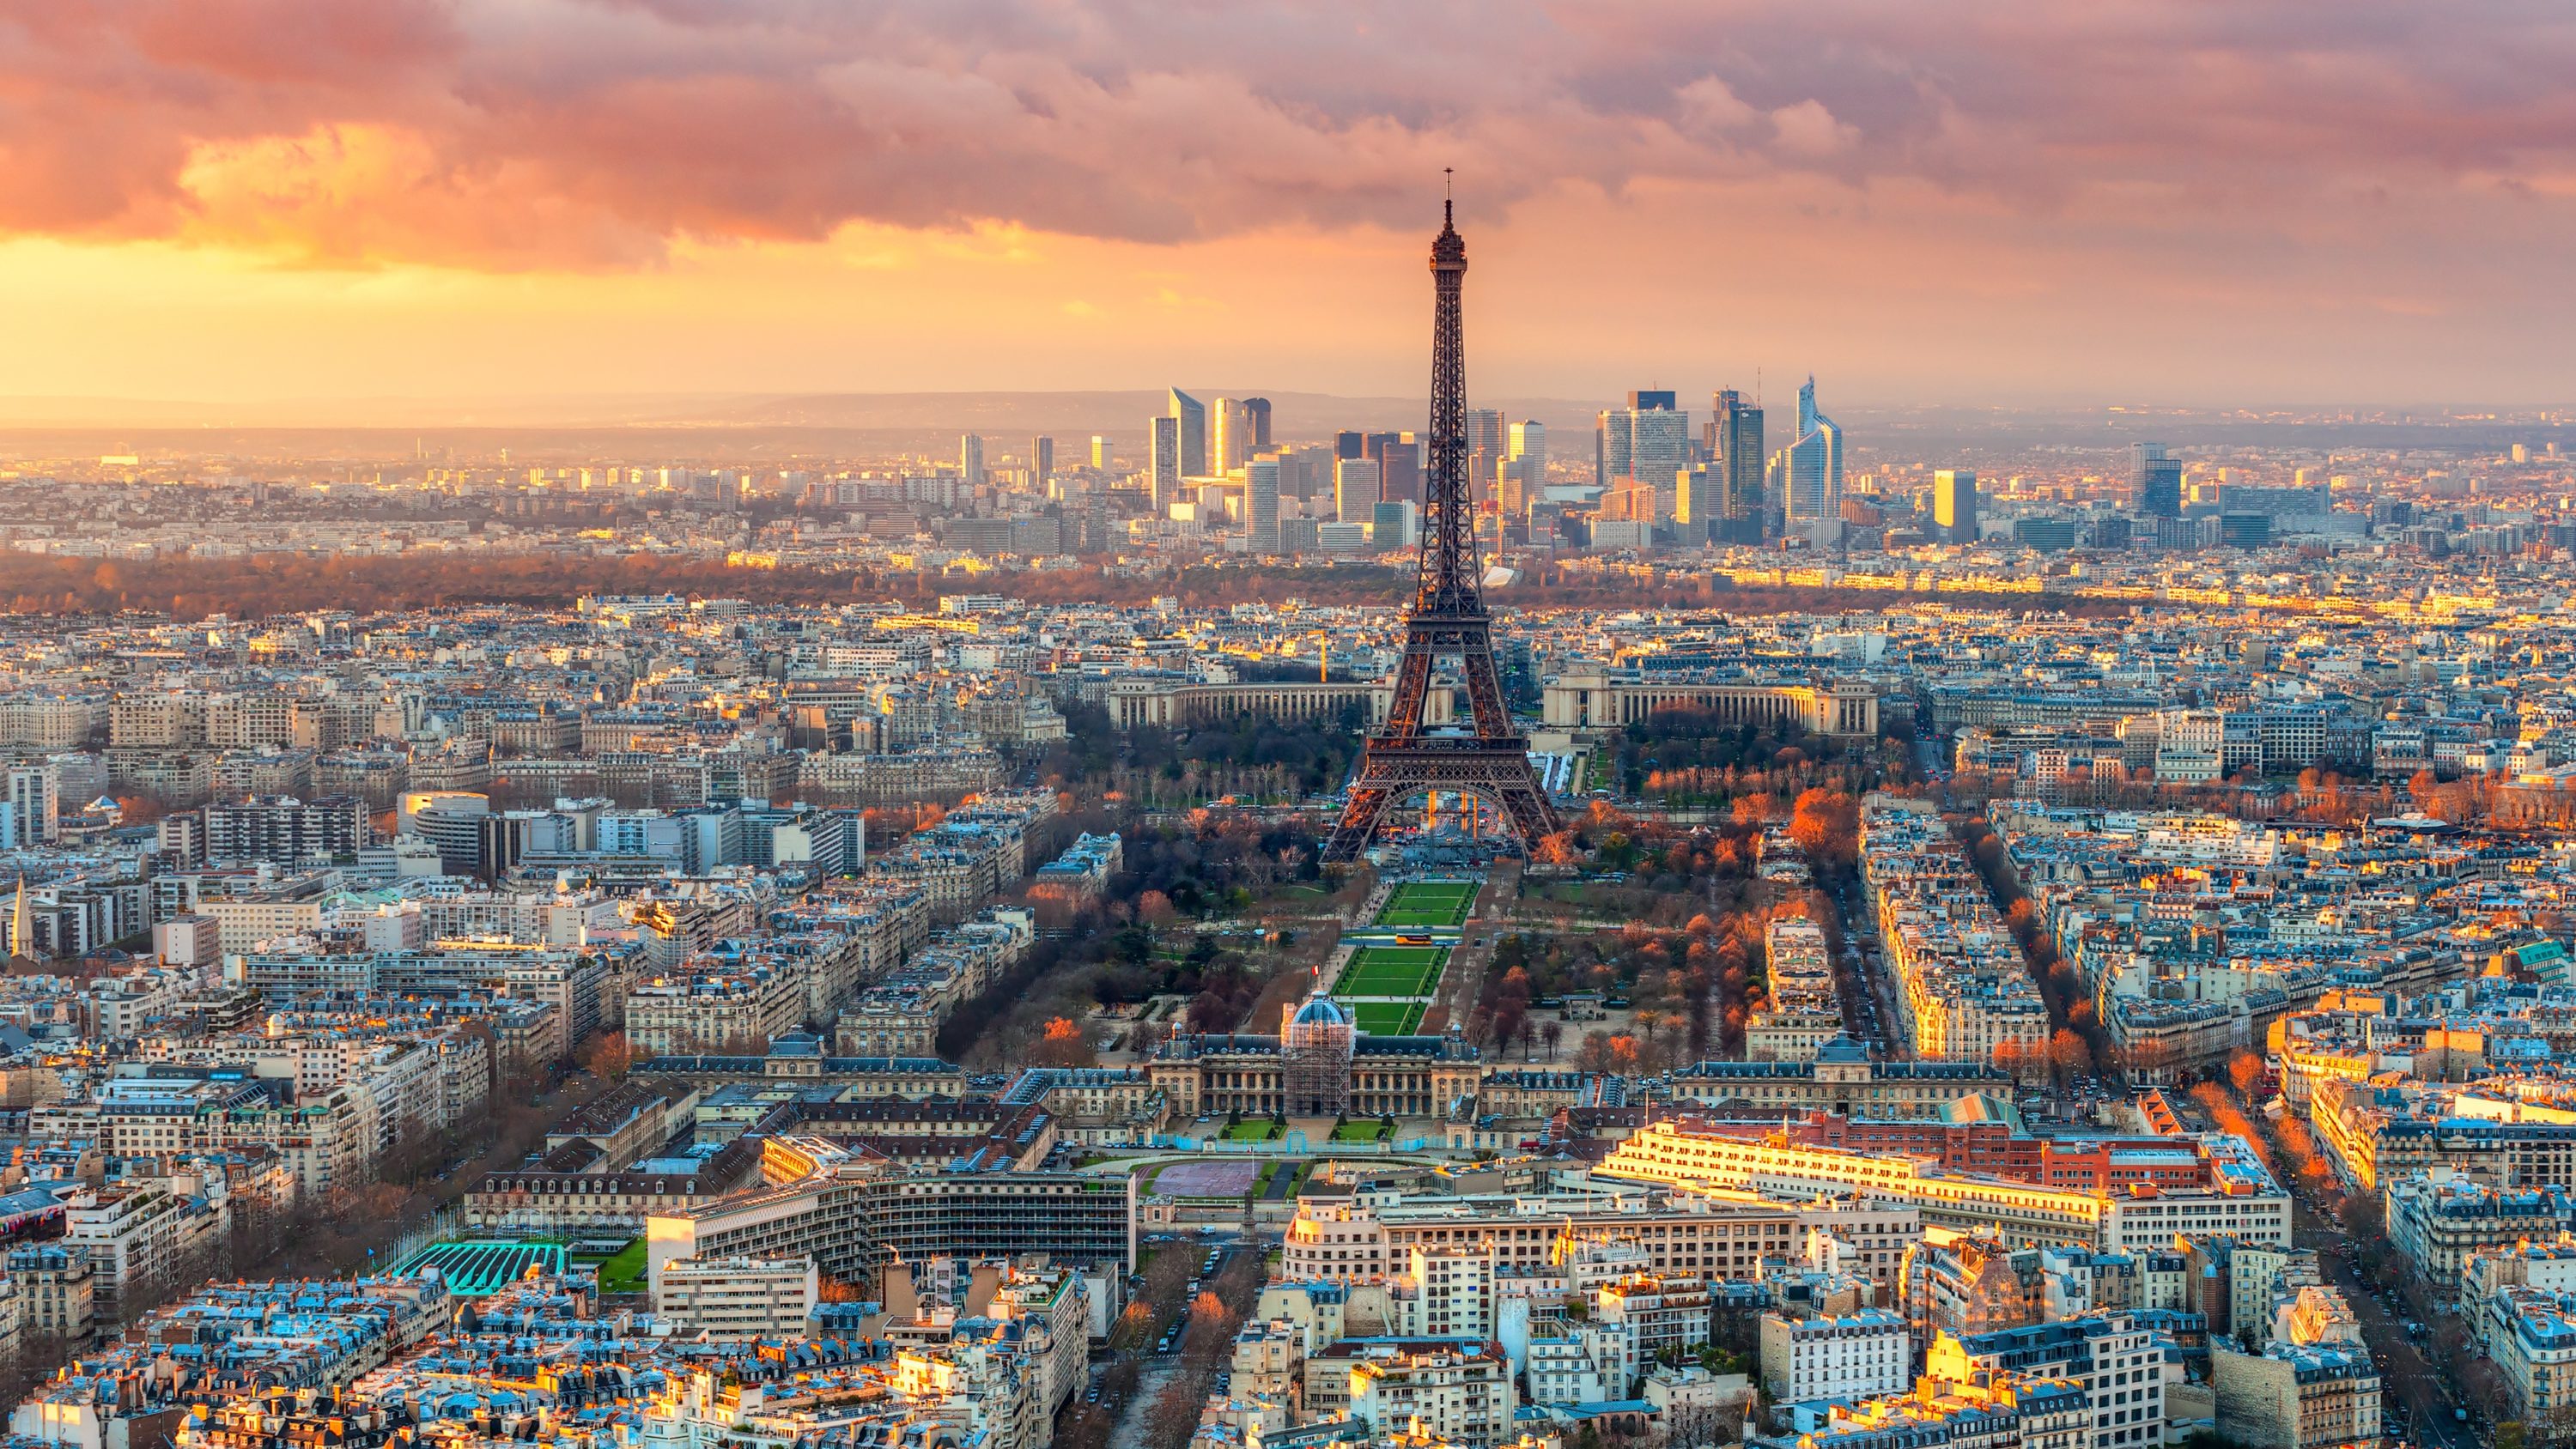 View of the Eiffel tower at sunset from Tour Montparnasse, Paris